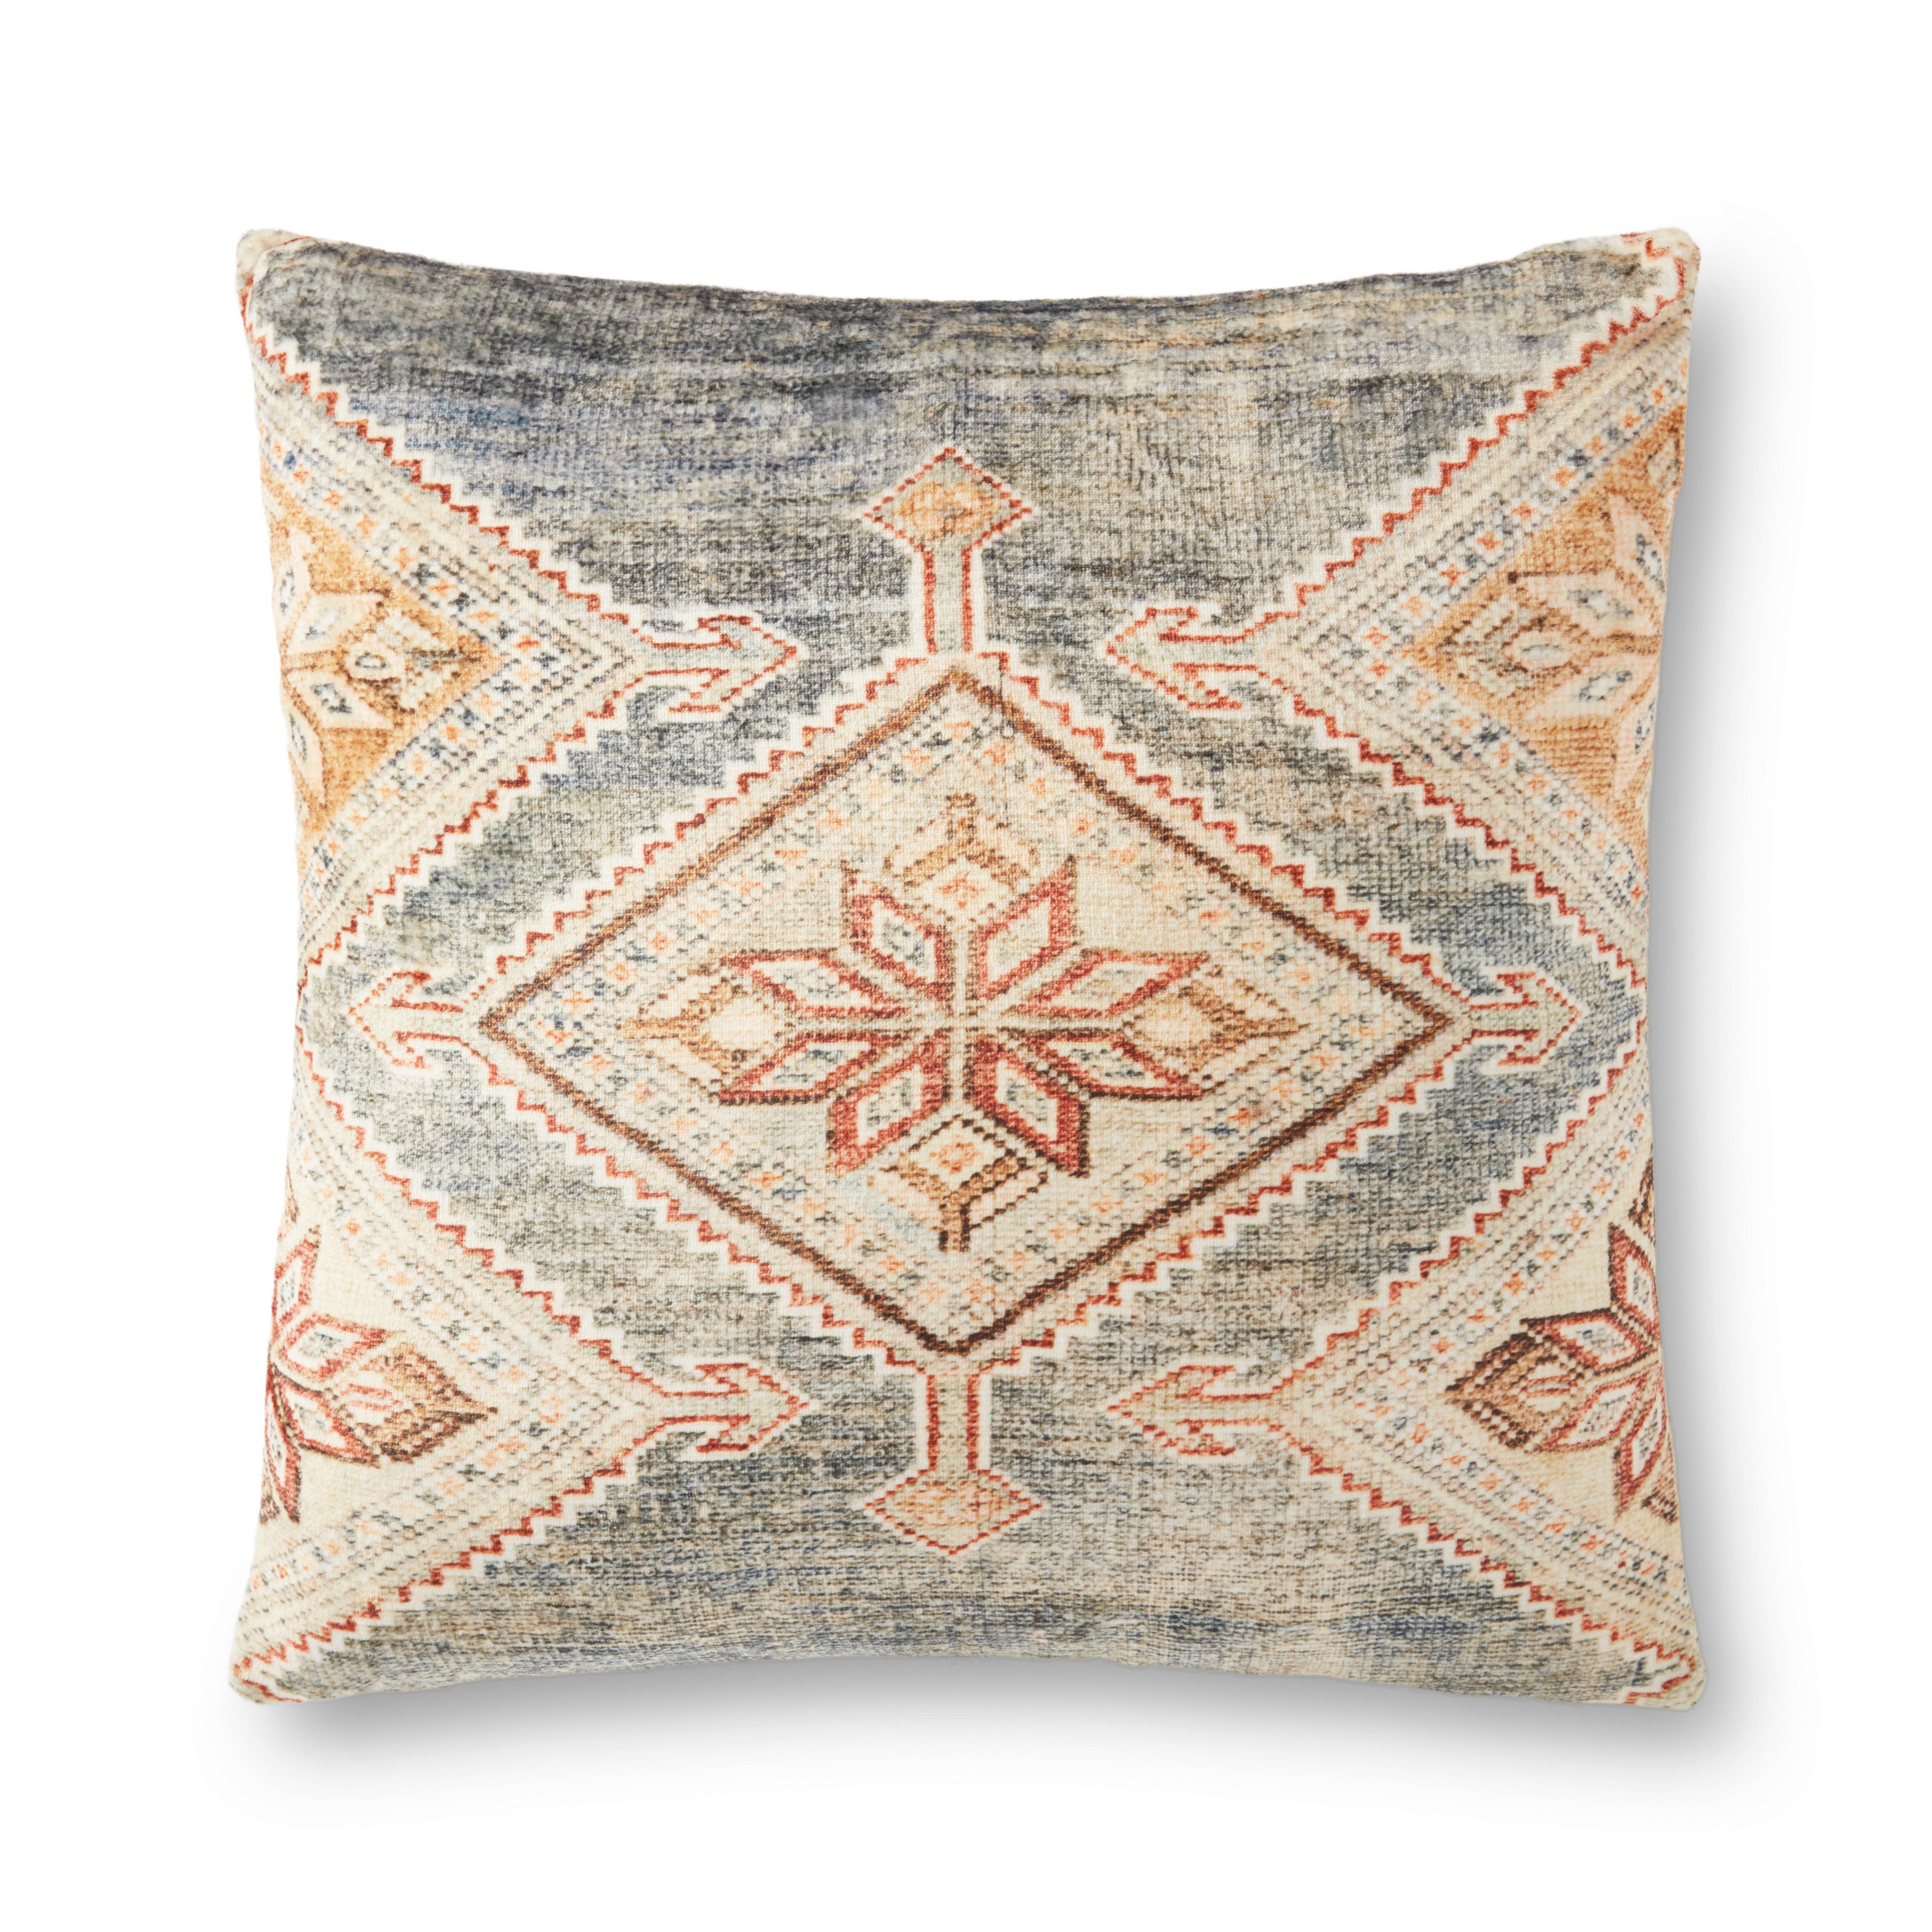 PILLOWS P0906 GREY / MULTI 22" x 22" Cover Only - Image 0